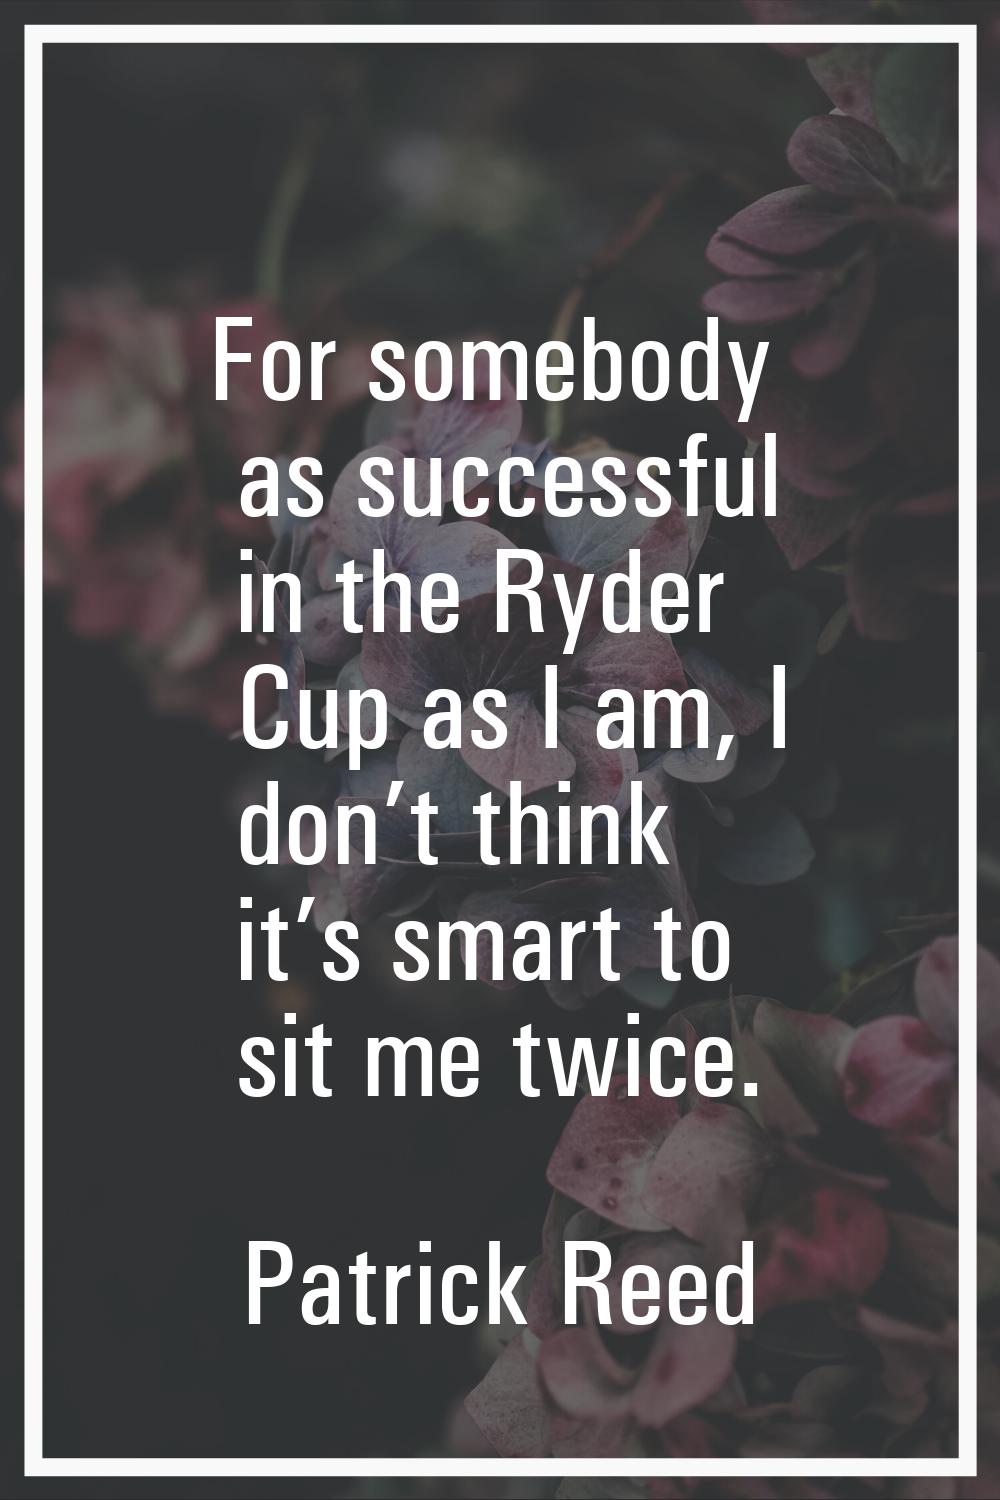 For somebody as successful in the Ryder Cup as I am, I don’t think it’s smart to sit me twice.